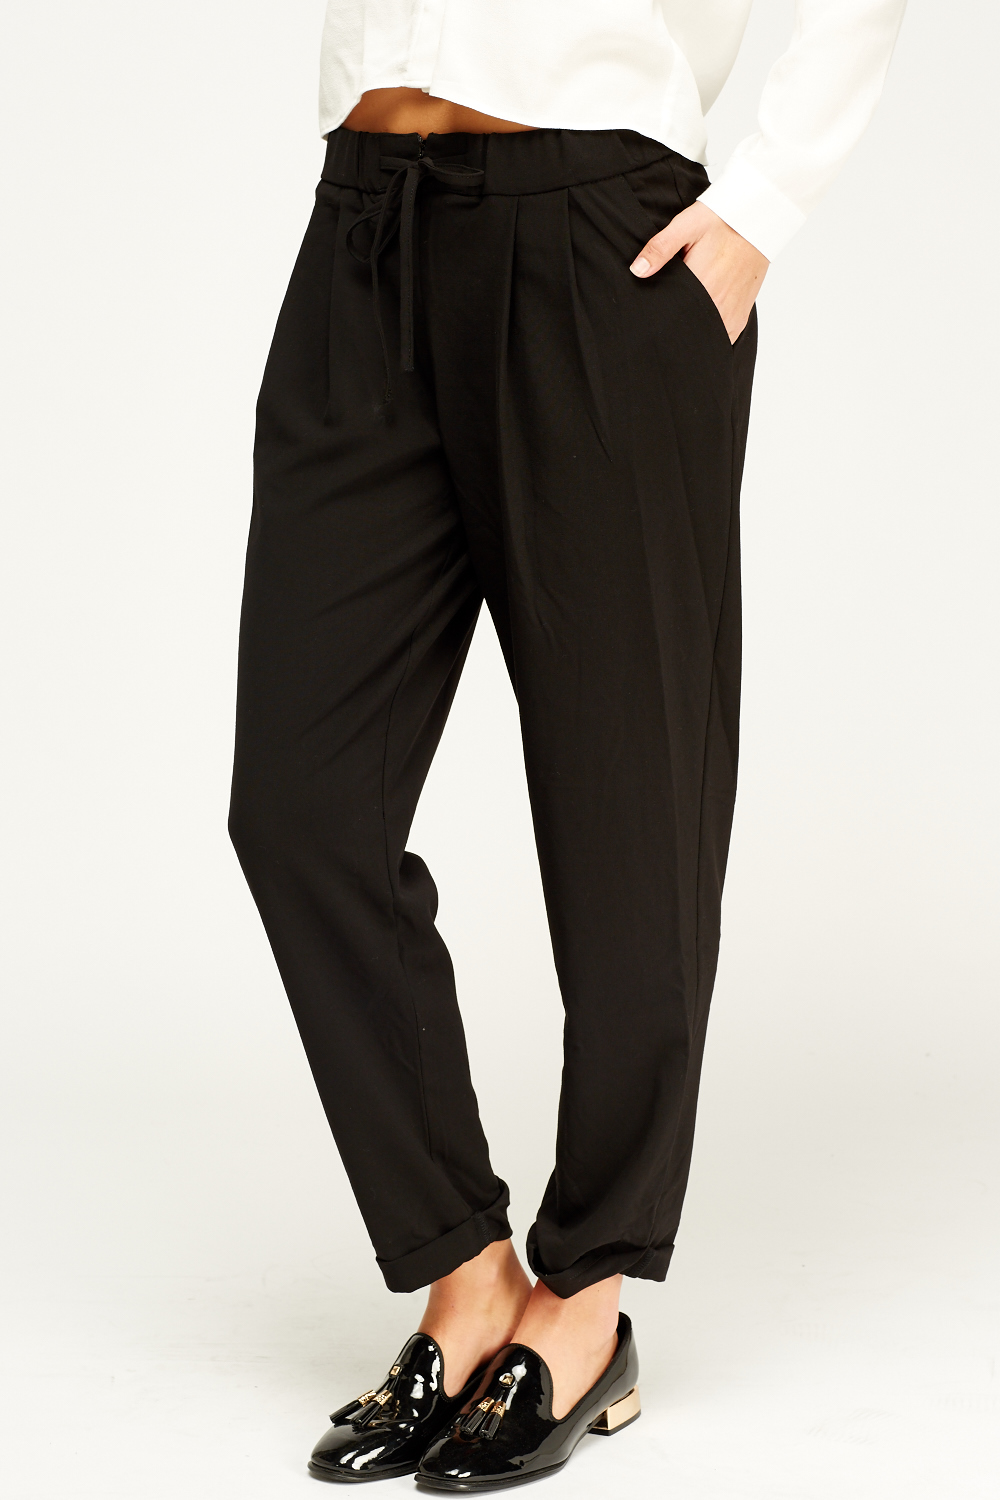 Elasticated Black Trousers - Just $7